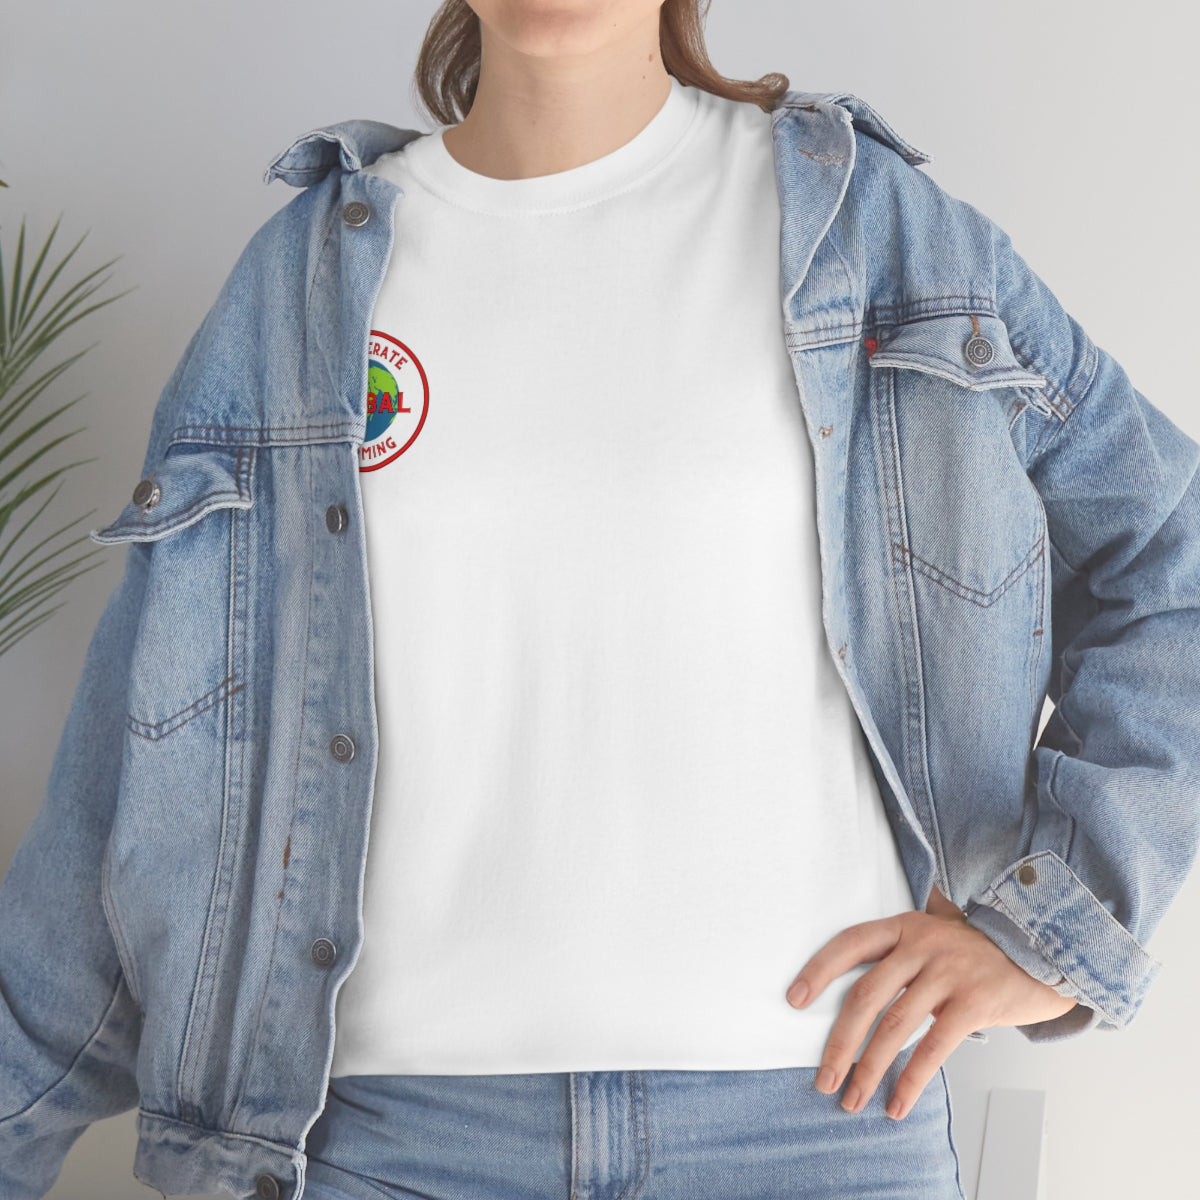 Accelerate Global Warming - Unisex Heavy Cotton Tee - Hot Take